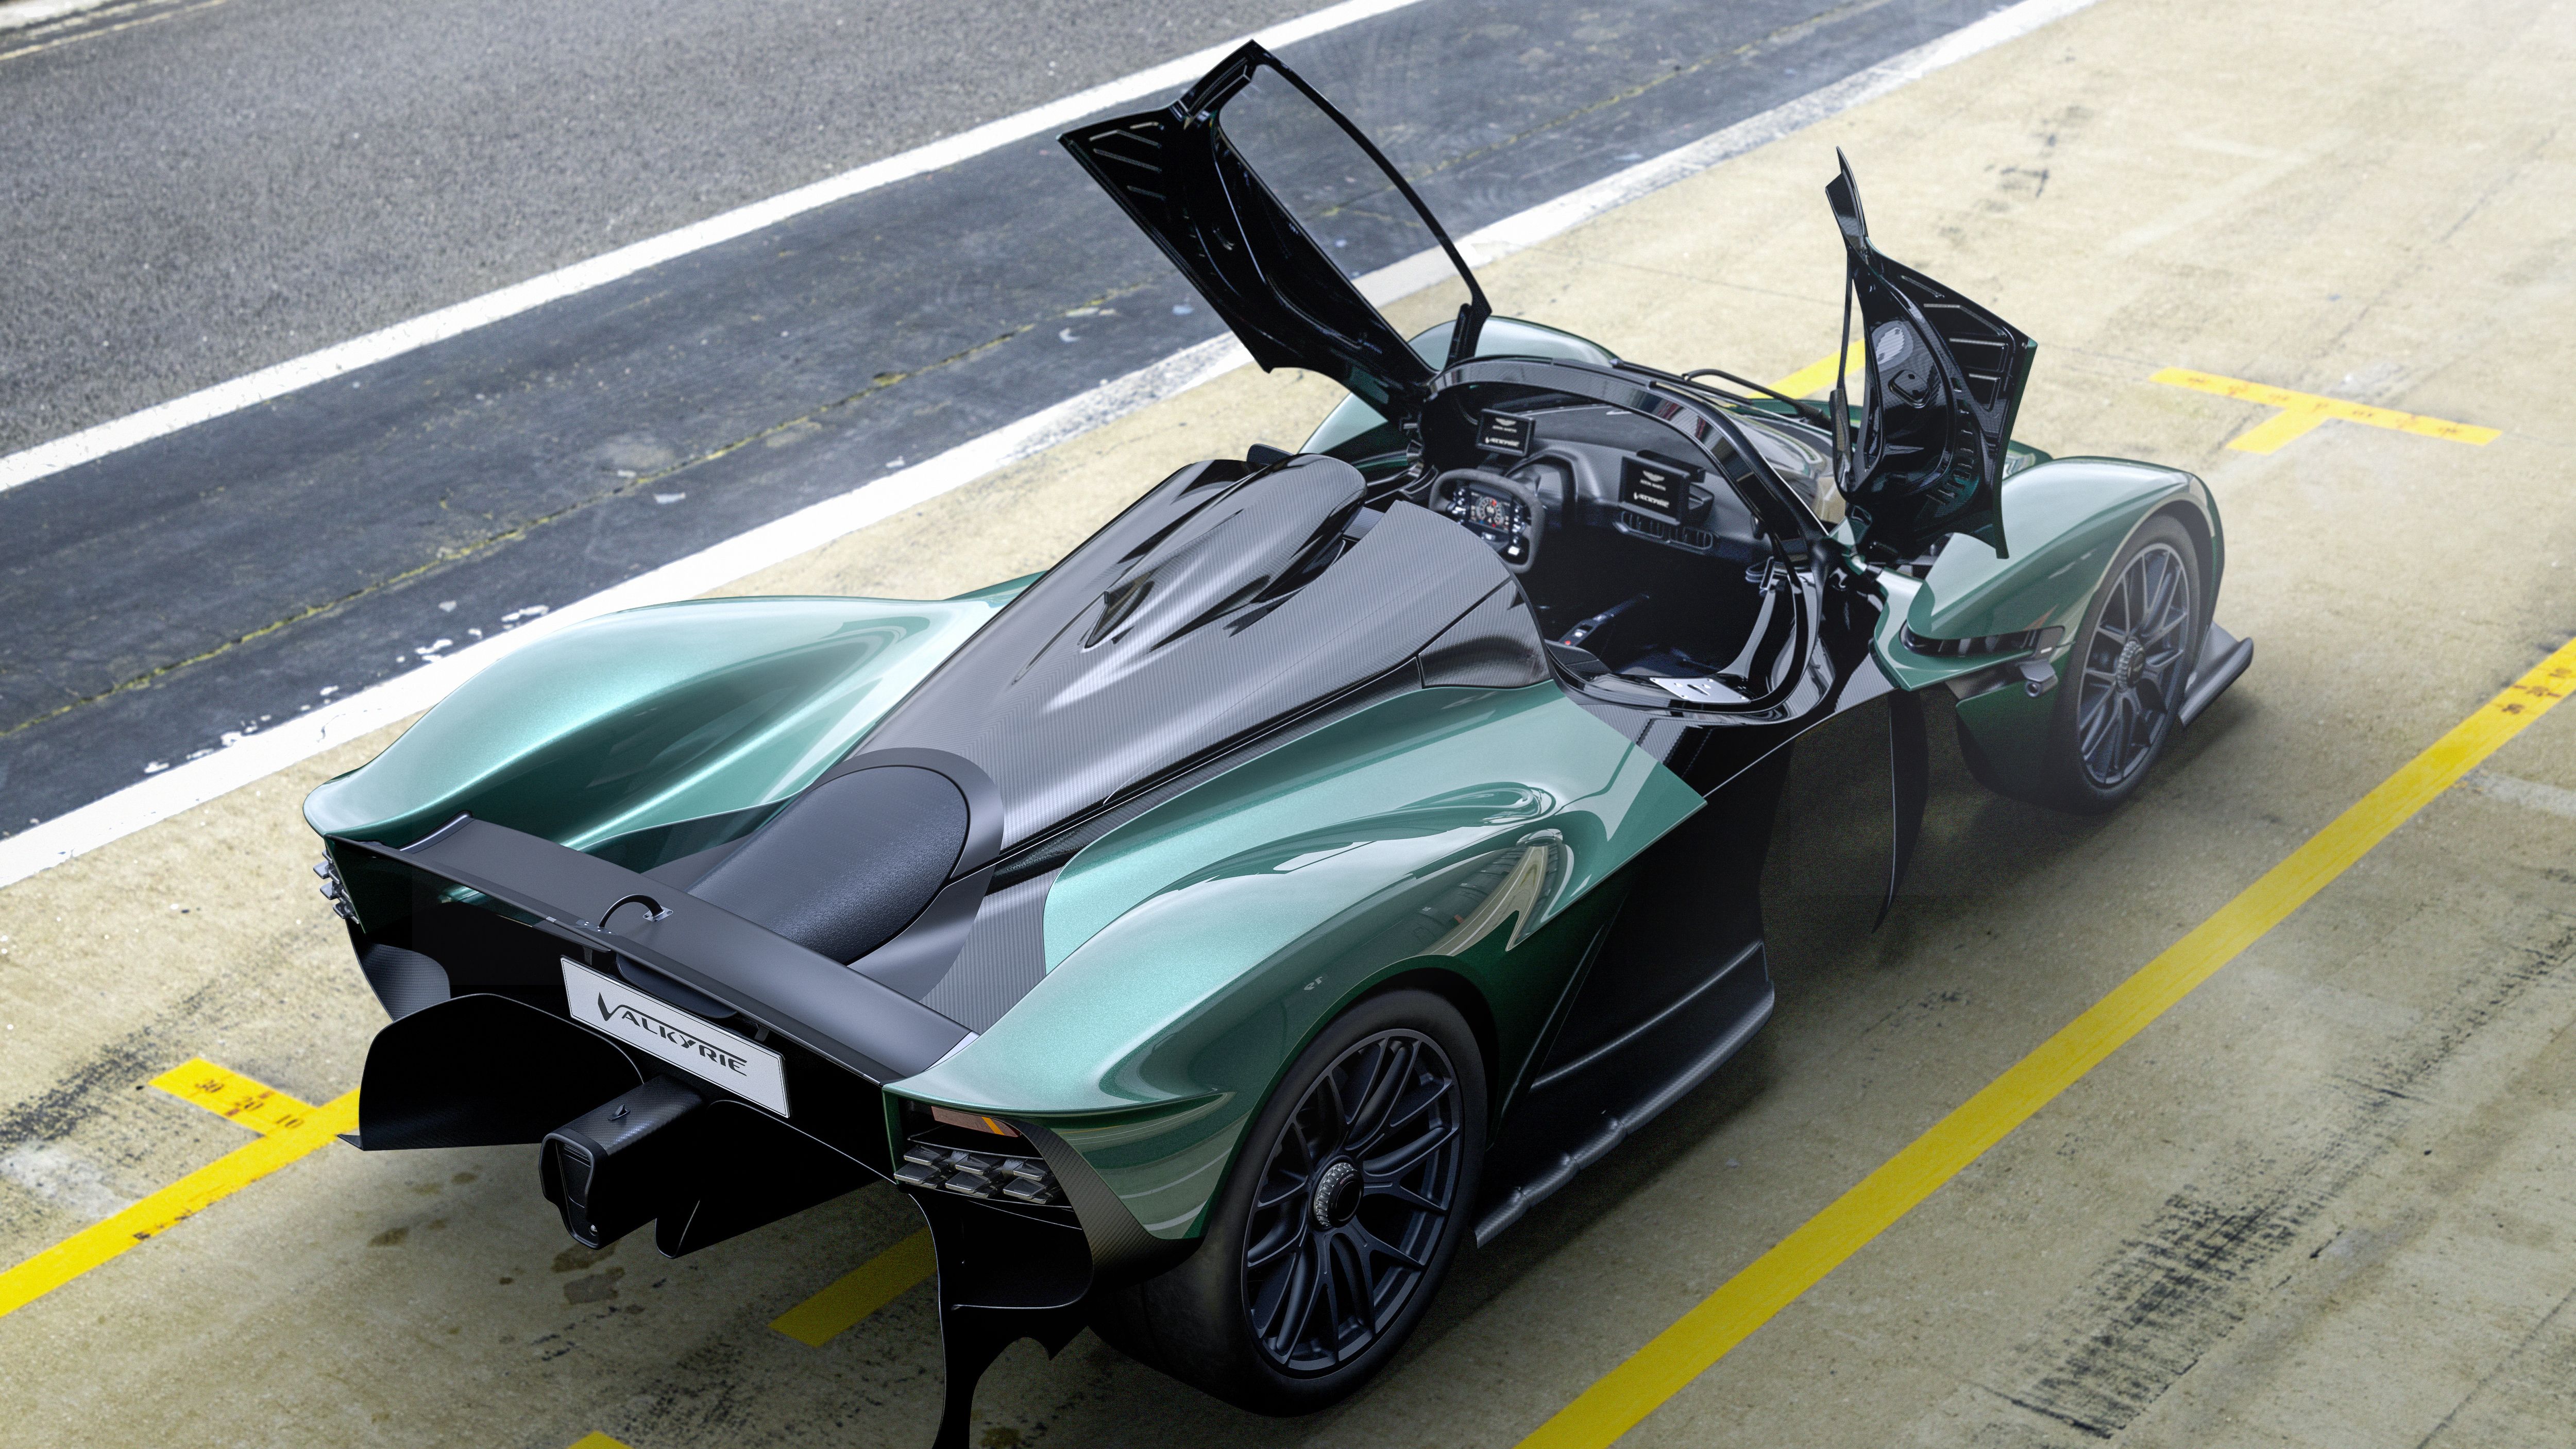 2021 Aston Martin Valkyrie Spider – A Valkyrie That Can Touch Speeds Of 205 mph With The Roof Off!